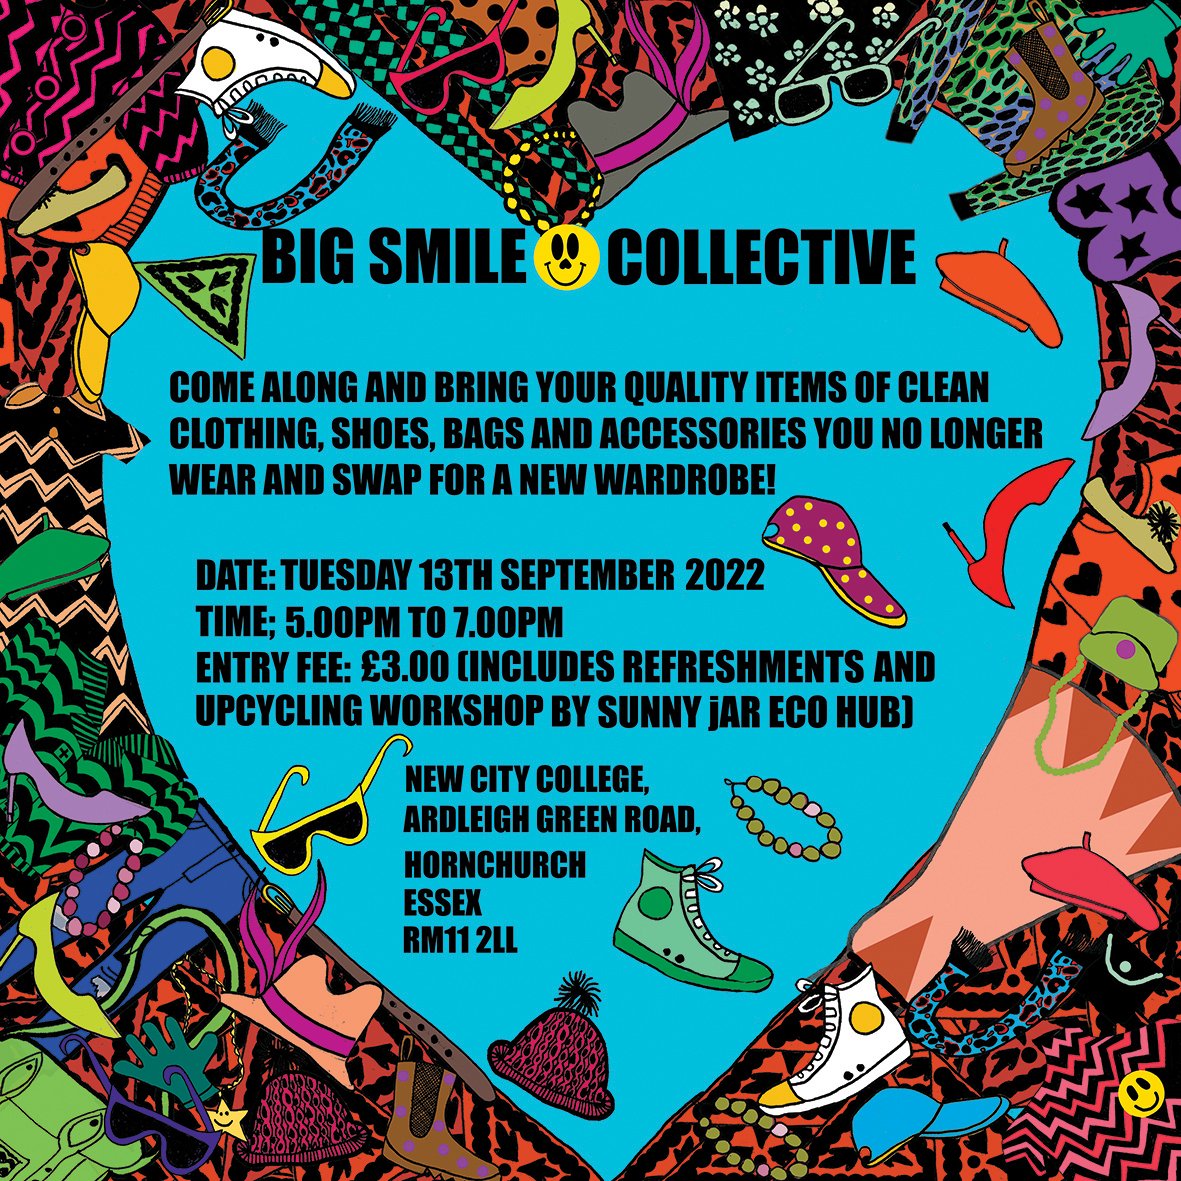 Clothes swap #BigSmileCollective tomorrow Tues 13 Sep 22, 5:00pm to 7:00pm, @nccardleigh_ New City College, Ardleigh Green Road, Hornchurch, Essex RM11 2LL. £3 includes refreshments & @sunnyjarecohub 'make a shopper from a t-shirt' workshop!
eventbrite.co.uk/e/big-smile-co…